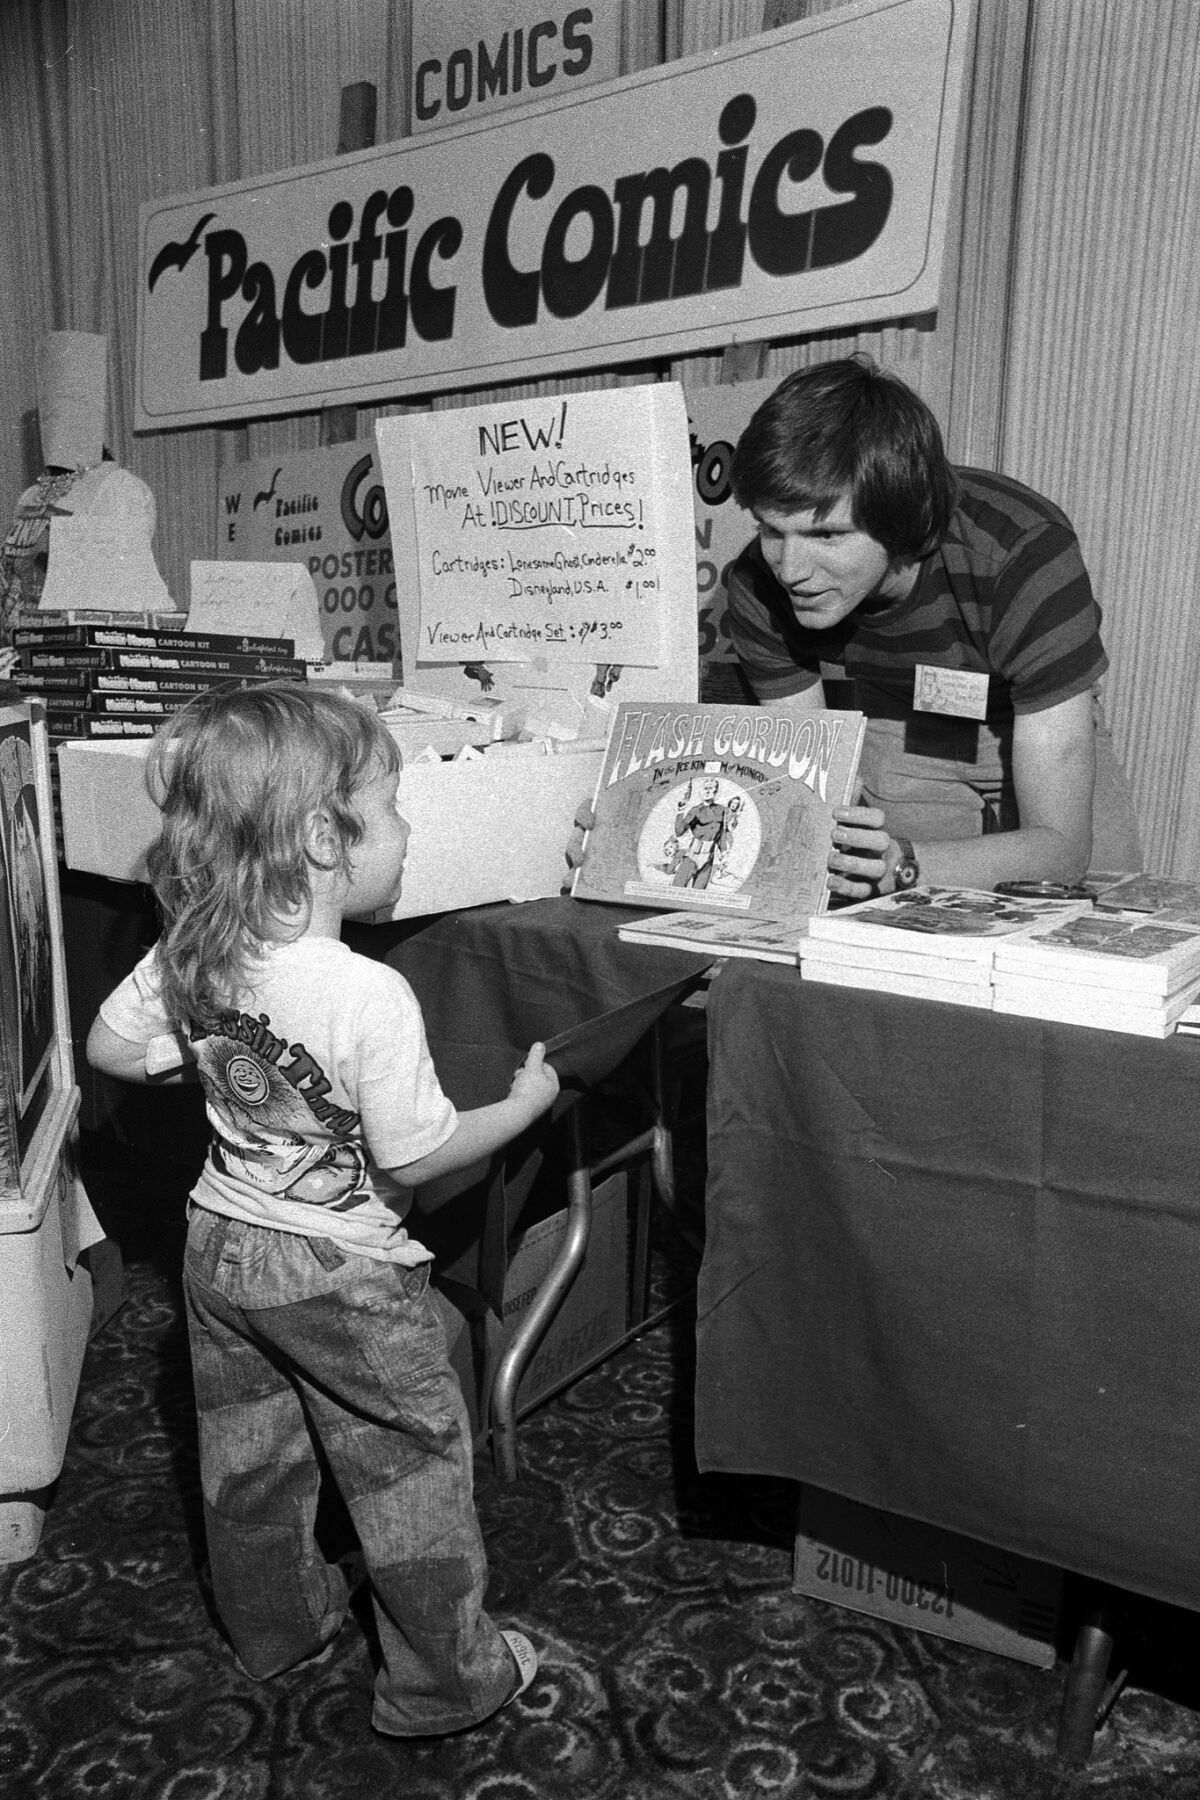 Bill Lund shows a Flash Gordon book to little Harry Knowles, 3-1/2, of Austin, Texas, at the San Diego Comic-Con in the El Cortez Hotel. Knowles would go on to found the website Ain't It Cool News.